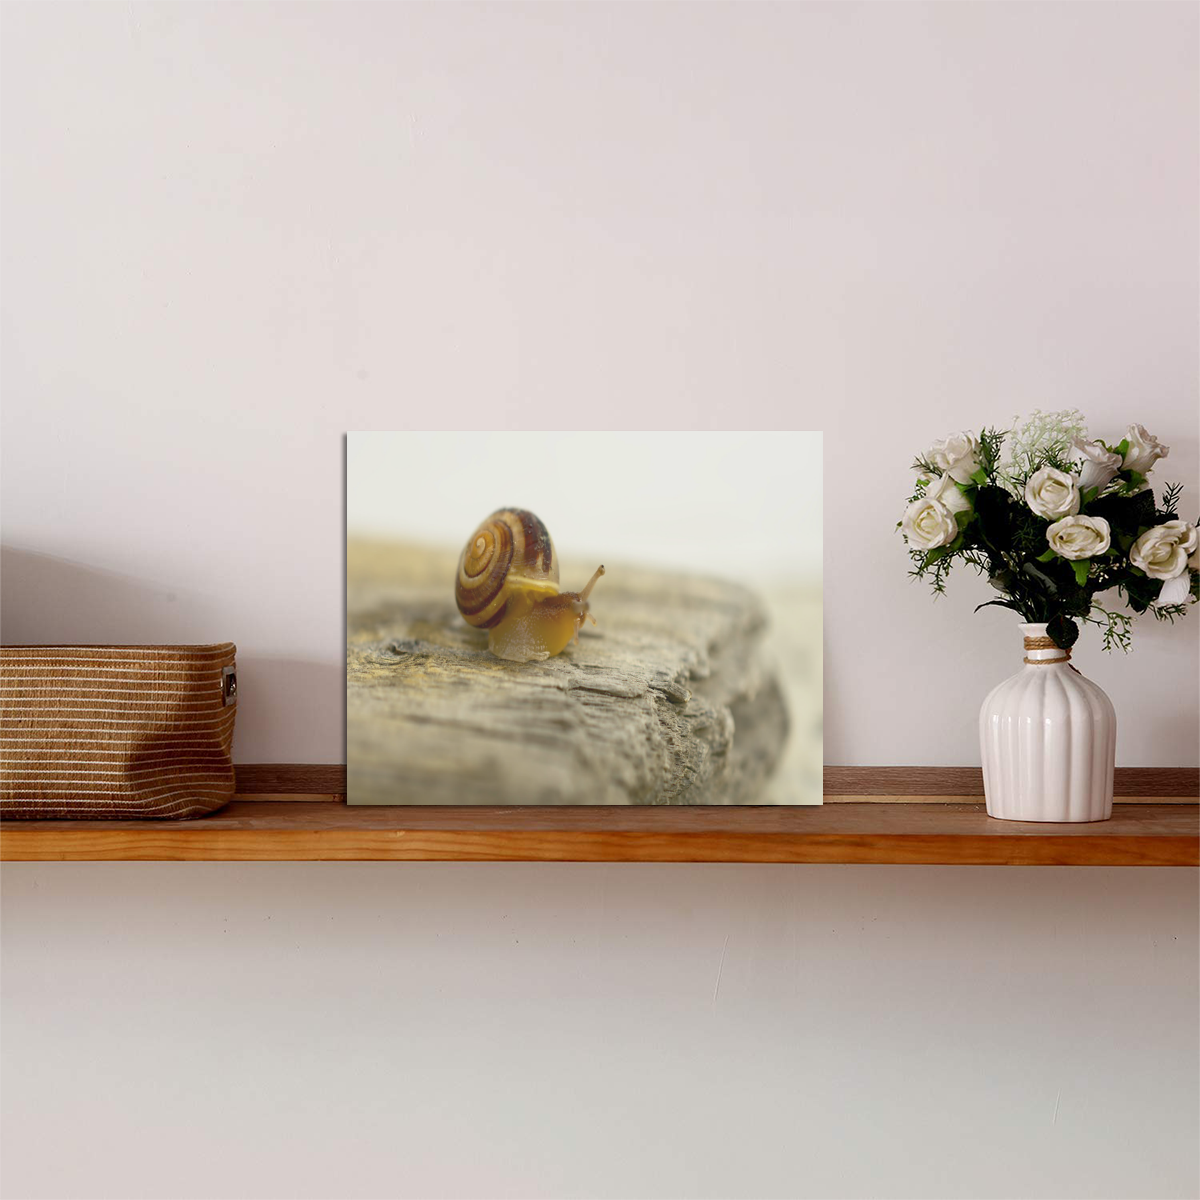 Solitary Snail Photo Panel for Tabletop Display 8"x6"